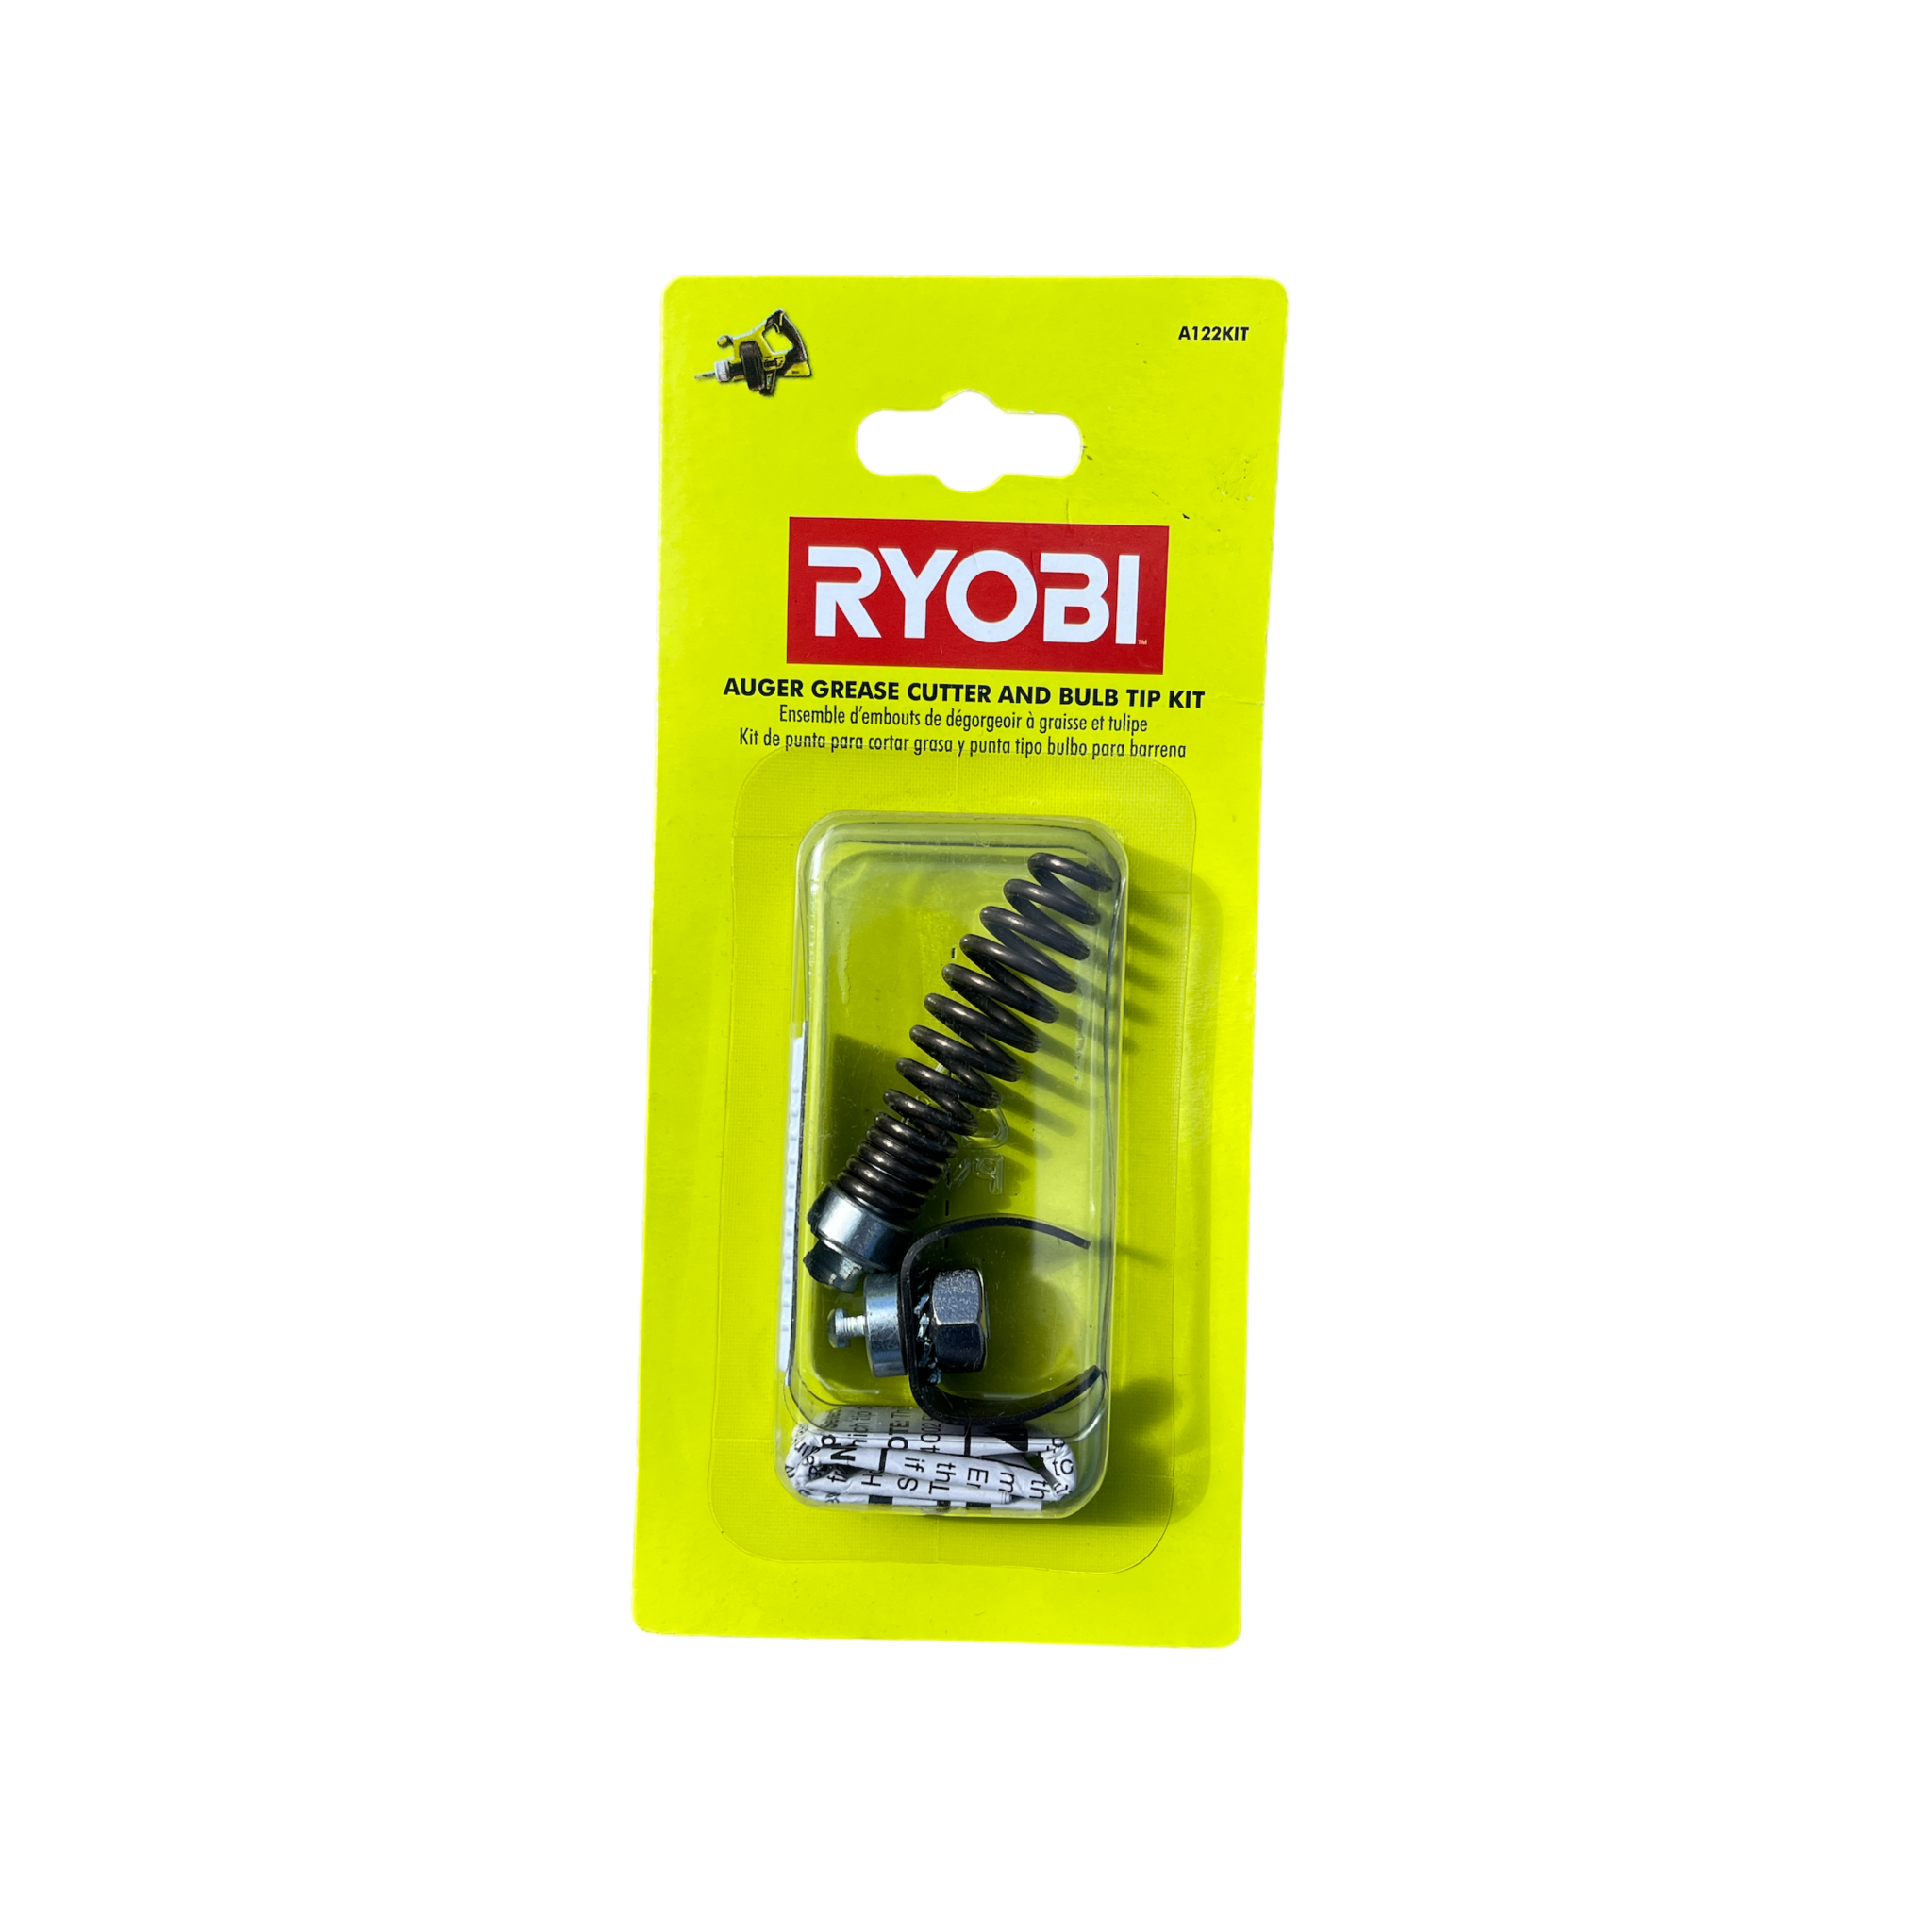 RYOBI Auger Grease Cutter and Bulb Tip Kit for Drain Auger P4002 Models